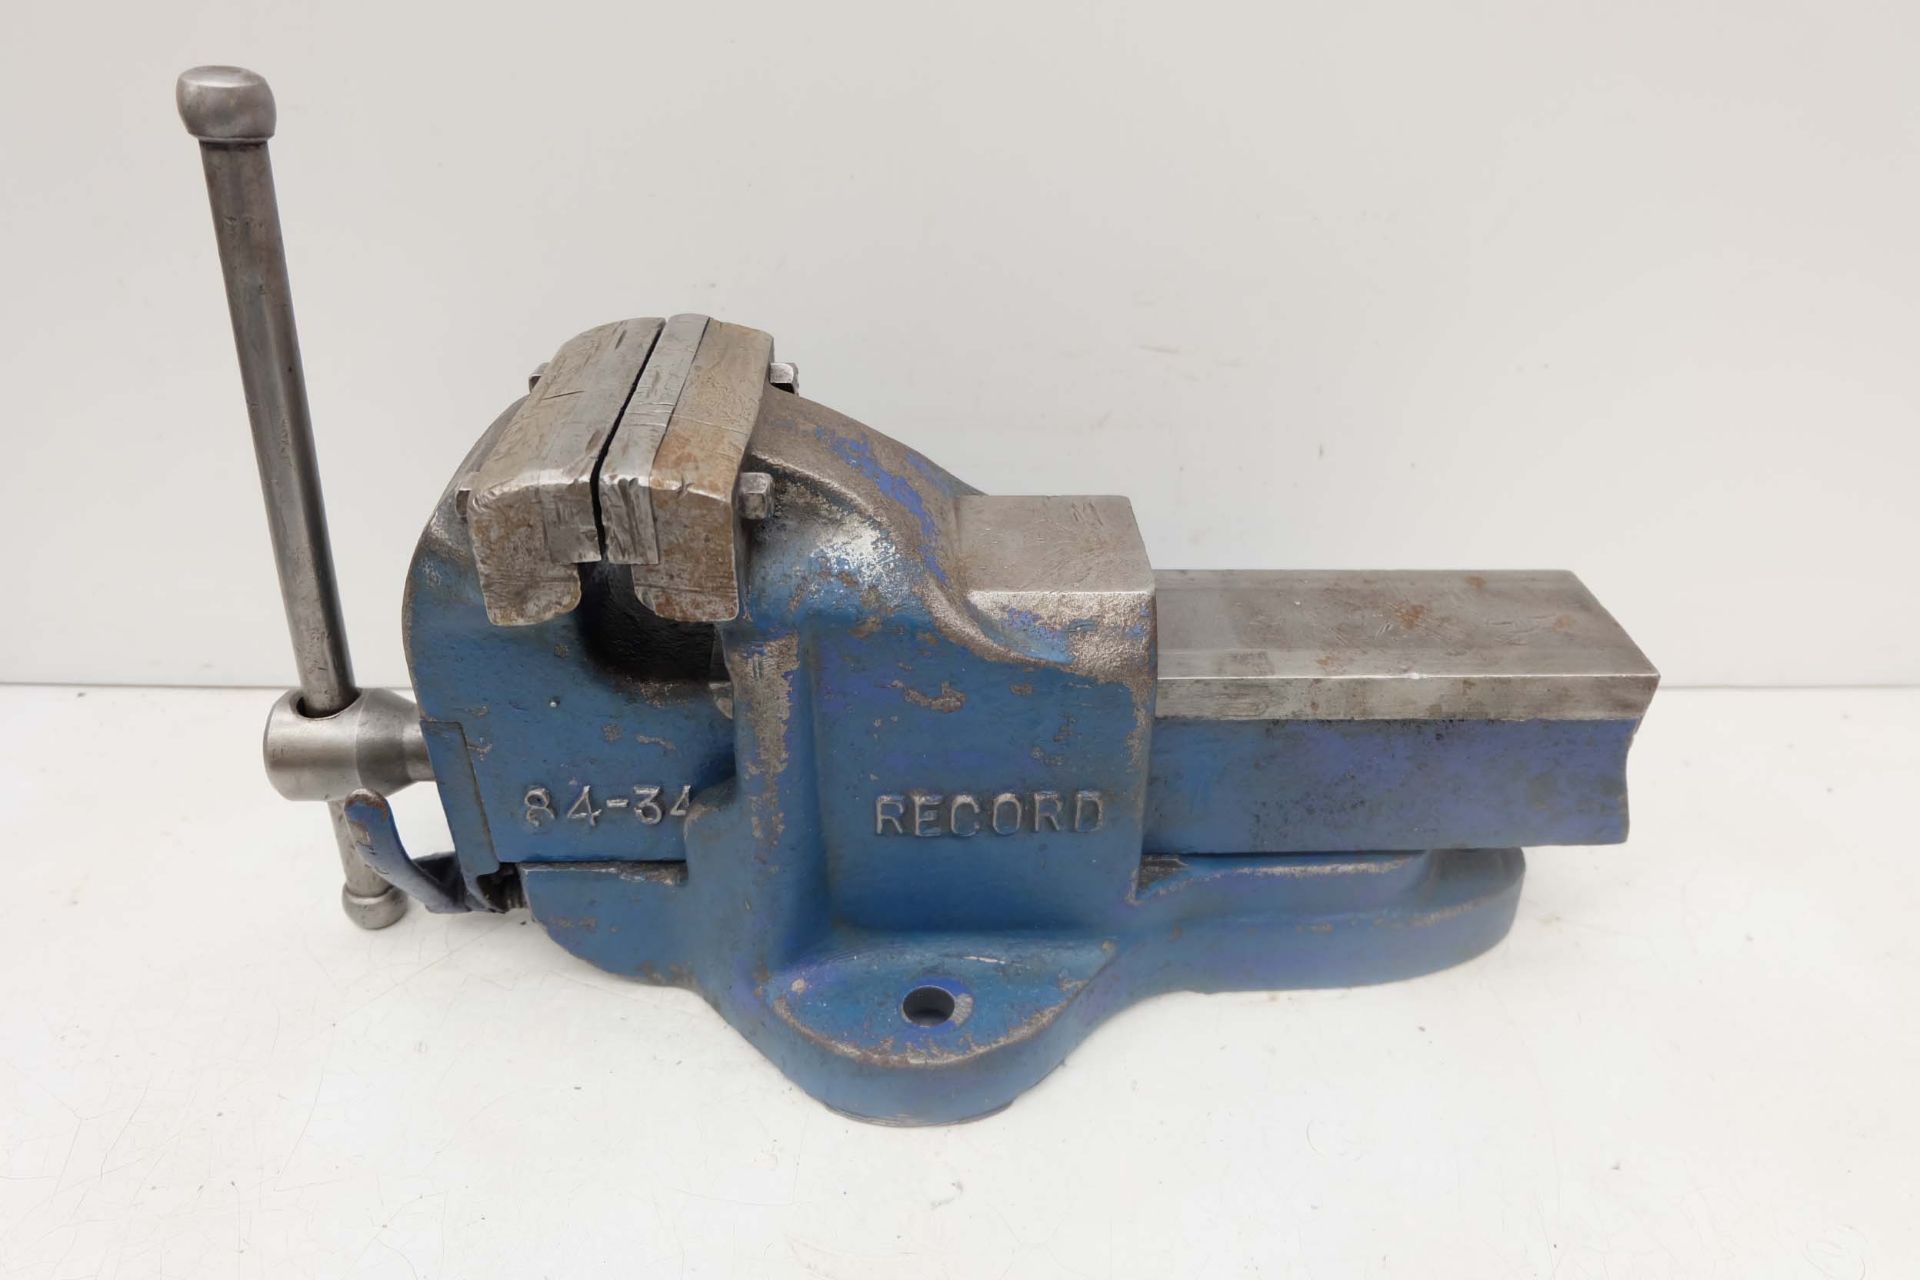 Record 84 - 34 Engineers Bench Vice. Width of Jaws 4 1/2". Maximum Opening 6". With Quick Release. - Image 2 of 6